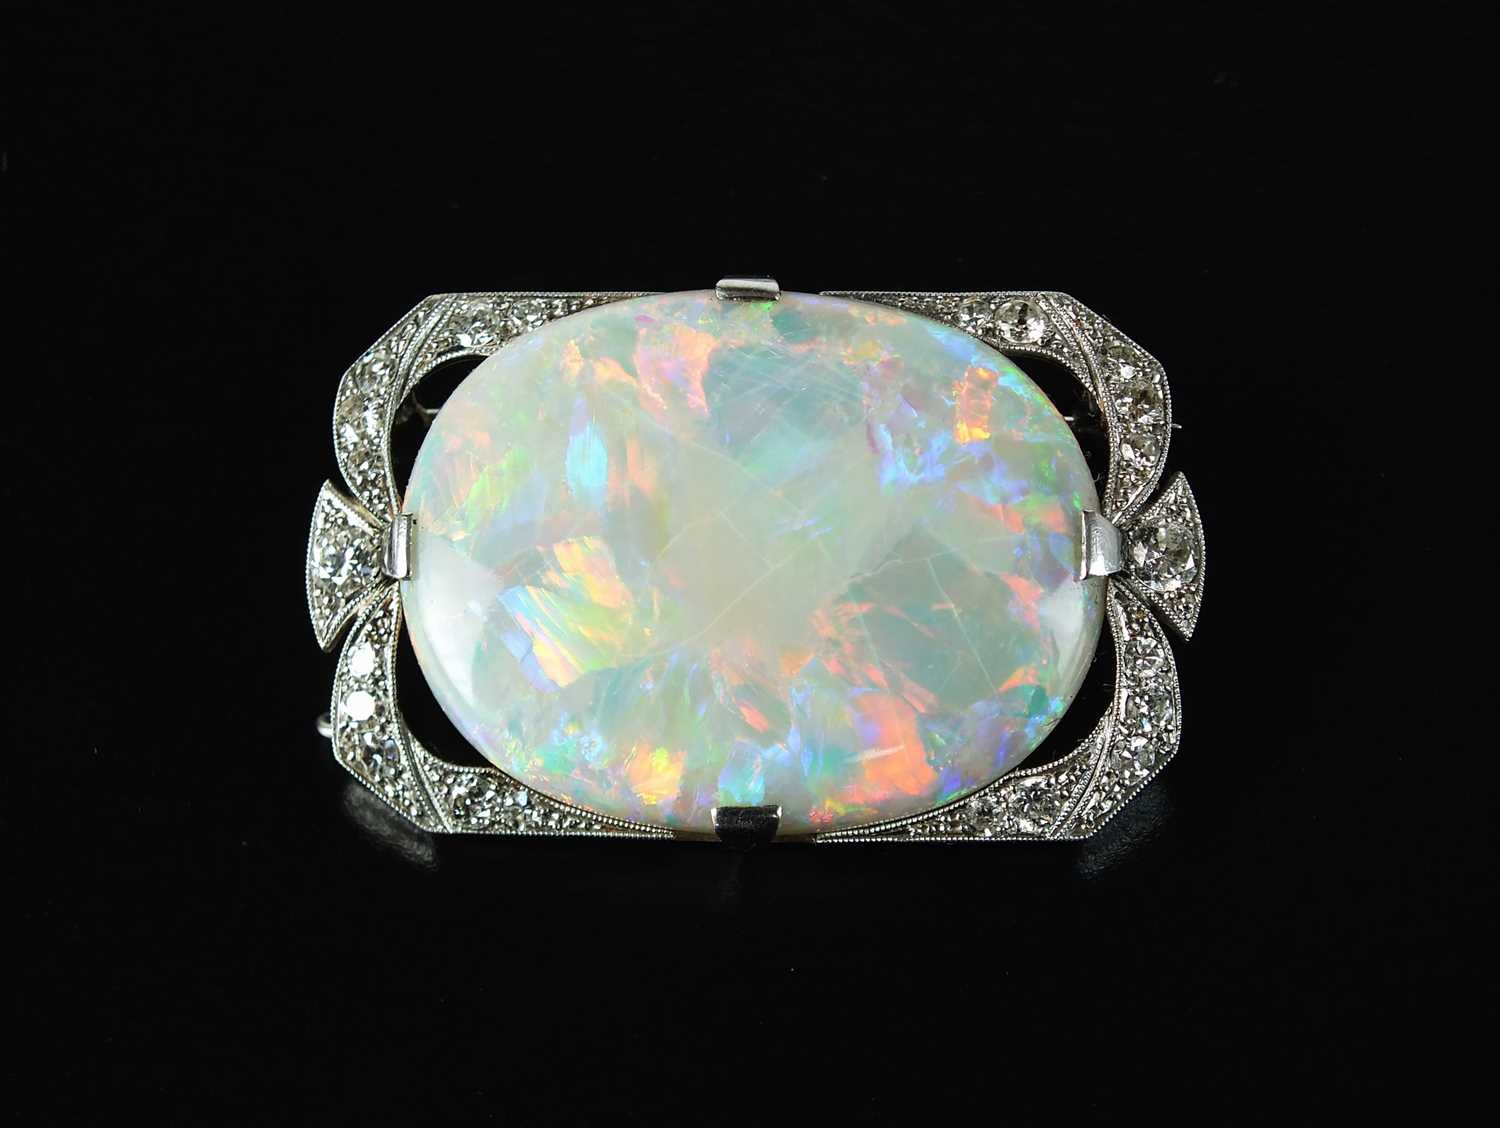 Lot 96 - An early 20th century opal and diamond brooch